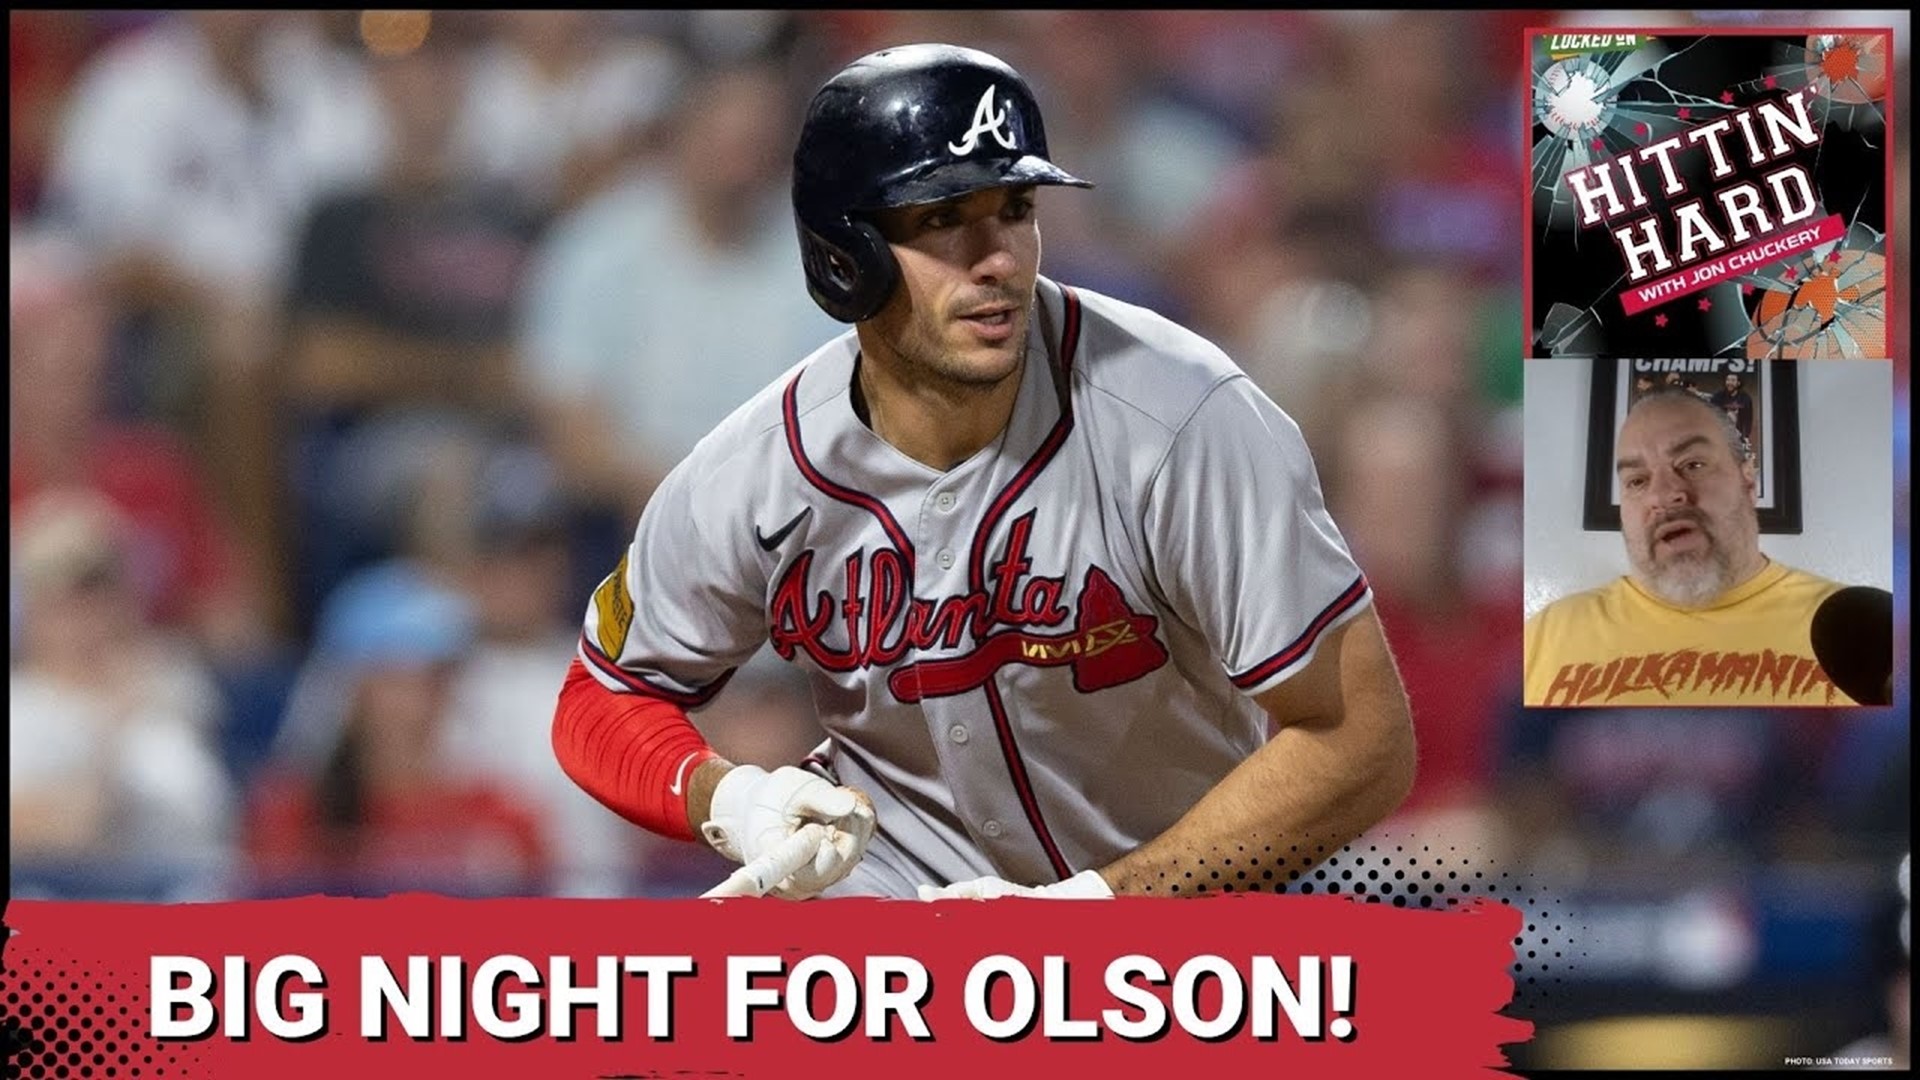 The Atlanta Braves found a way to win against the Phillies. Matt Olson made history by hitting his 51st home run tying Andruw Jones for the franchise record